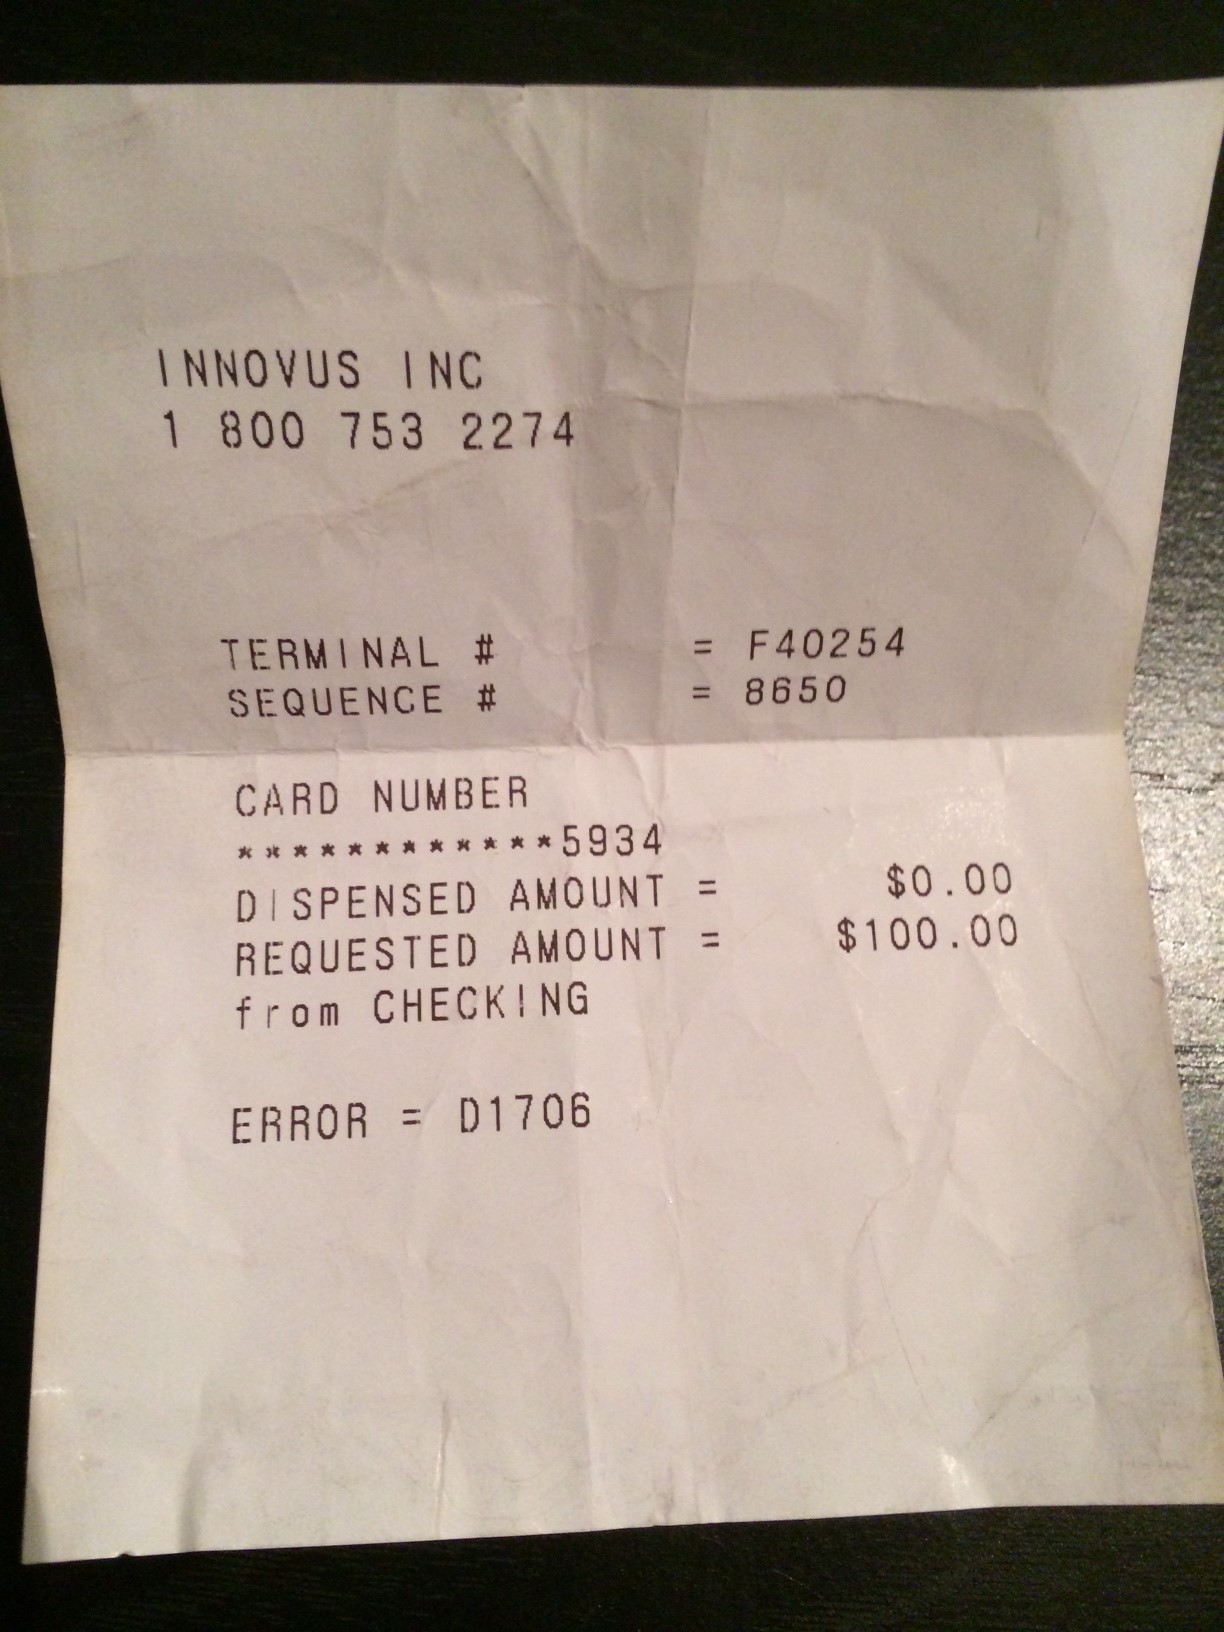 Here is the receipt  I received documenting that I did not receive any money.